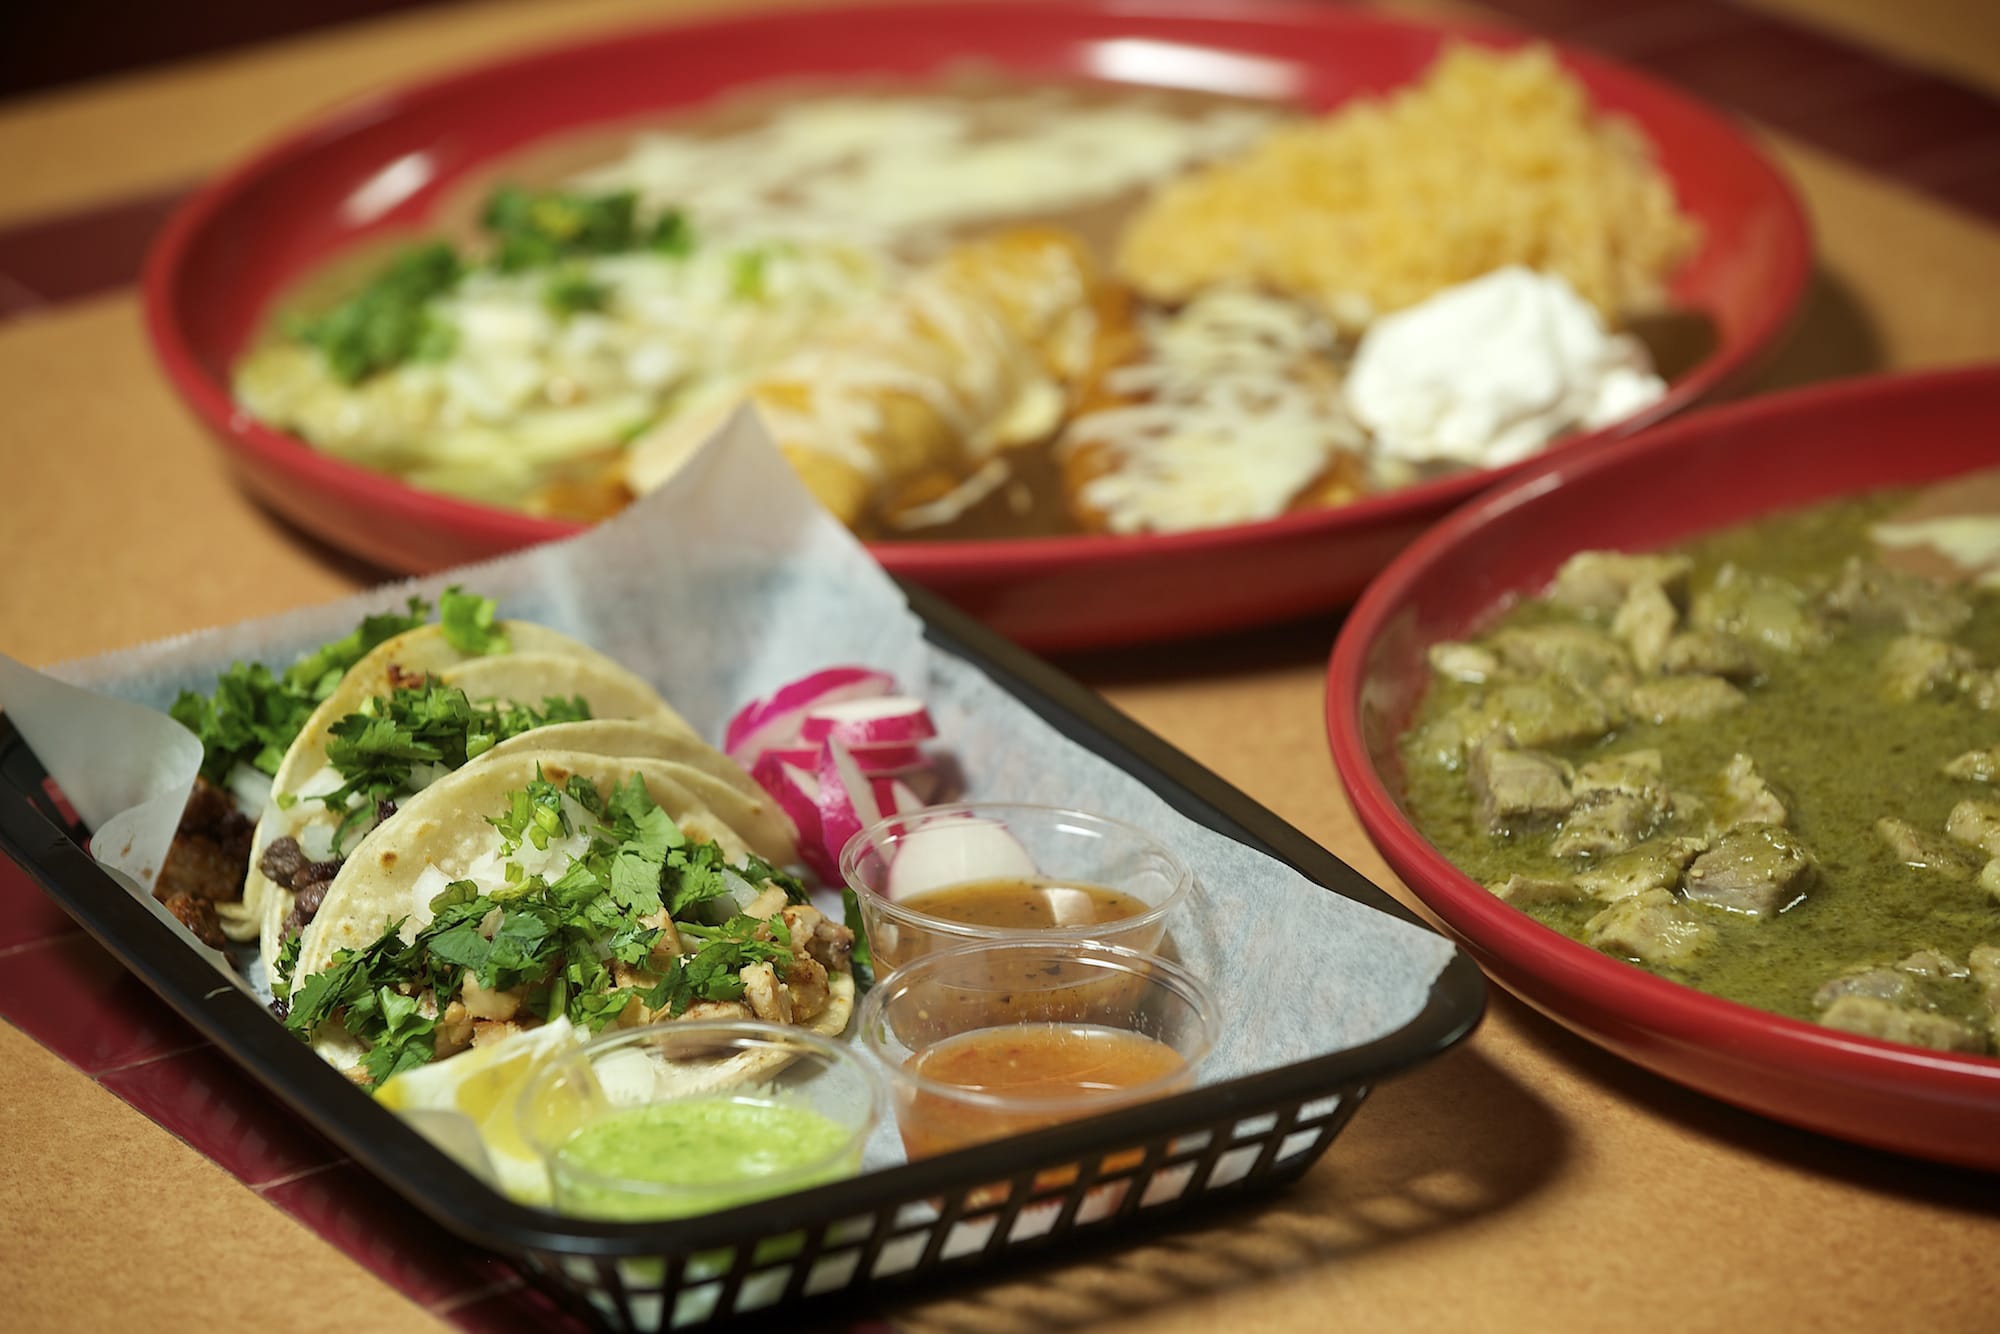 An enchilada sampler, background, chili verde, right, and street tacos (one steak and one chicken) are some of the menu items offered at Lindo Mexico Restaurant &amp; Cantina in Vancouver.